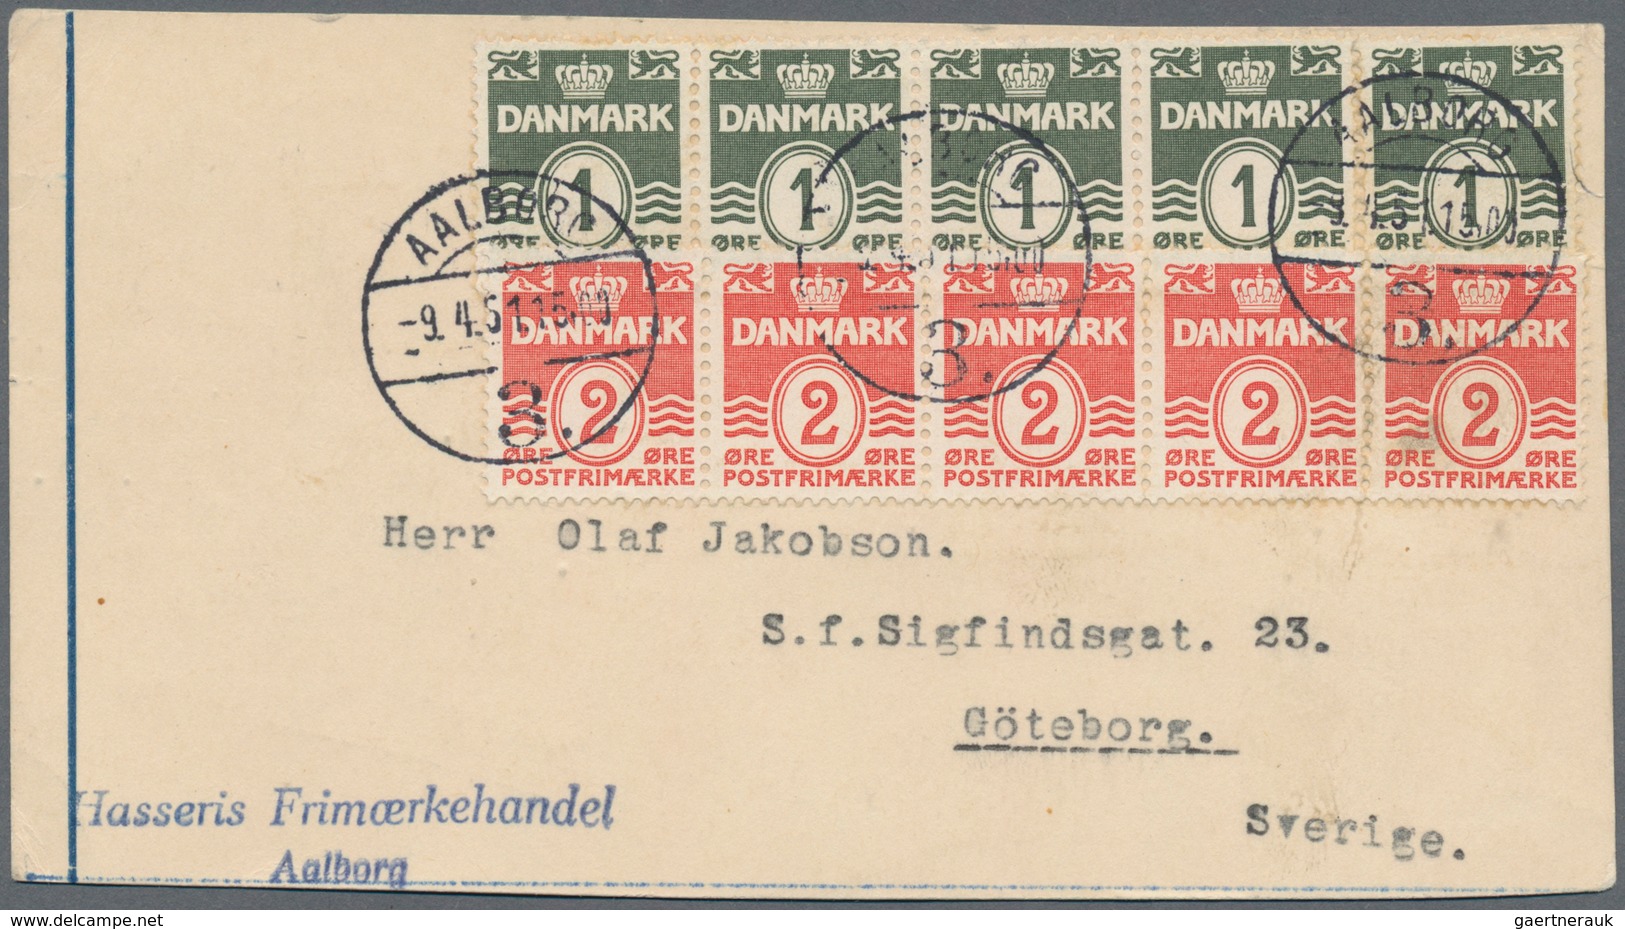 Dänemark: 1870/1995, holding of ca. 200 letters, cards and postal stationery, incl. registered mail,